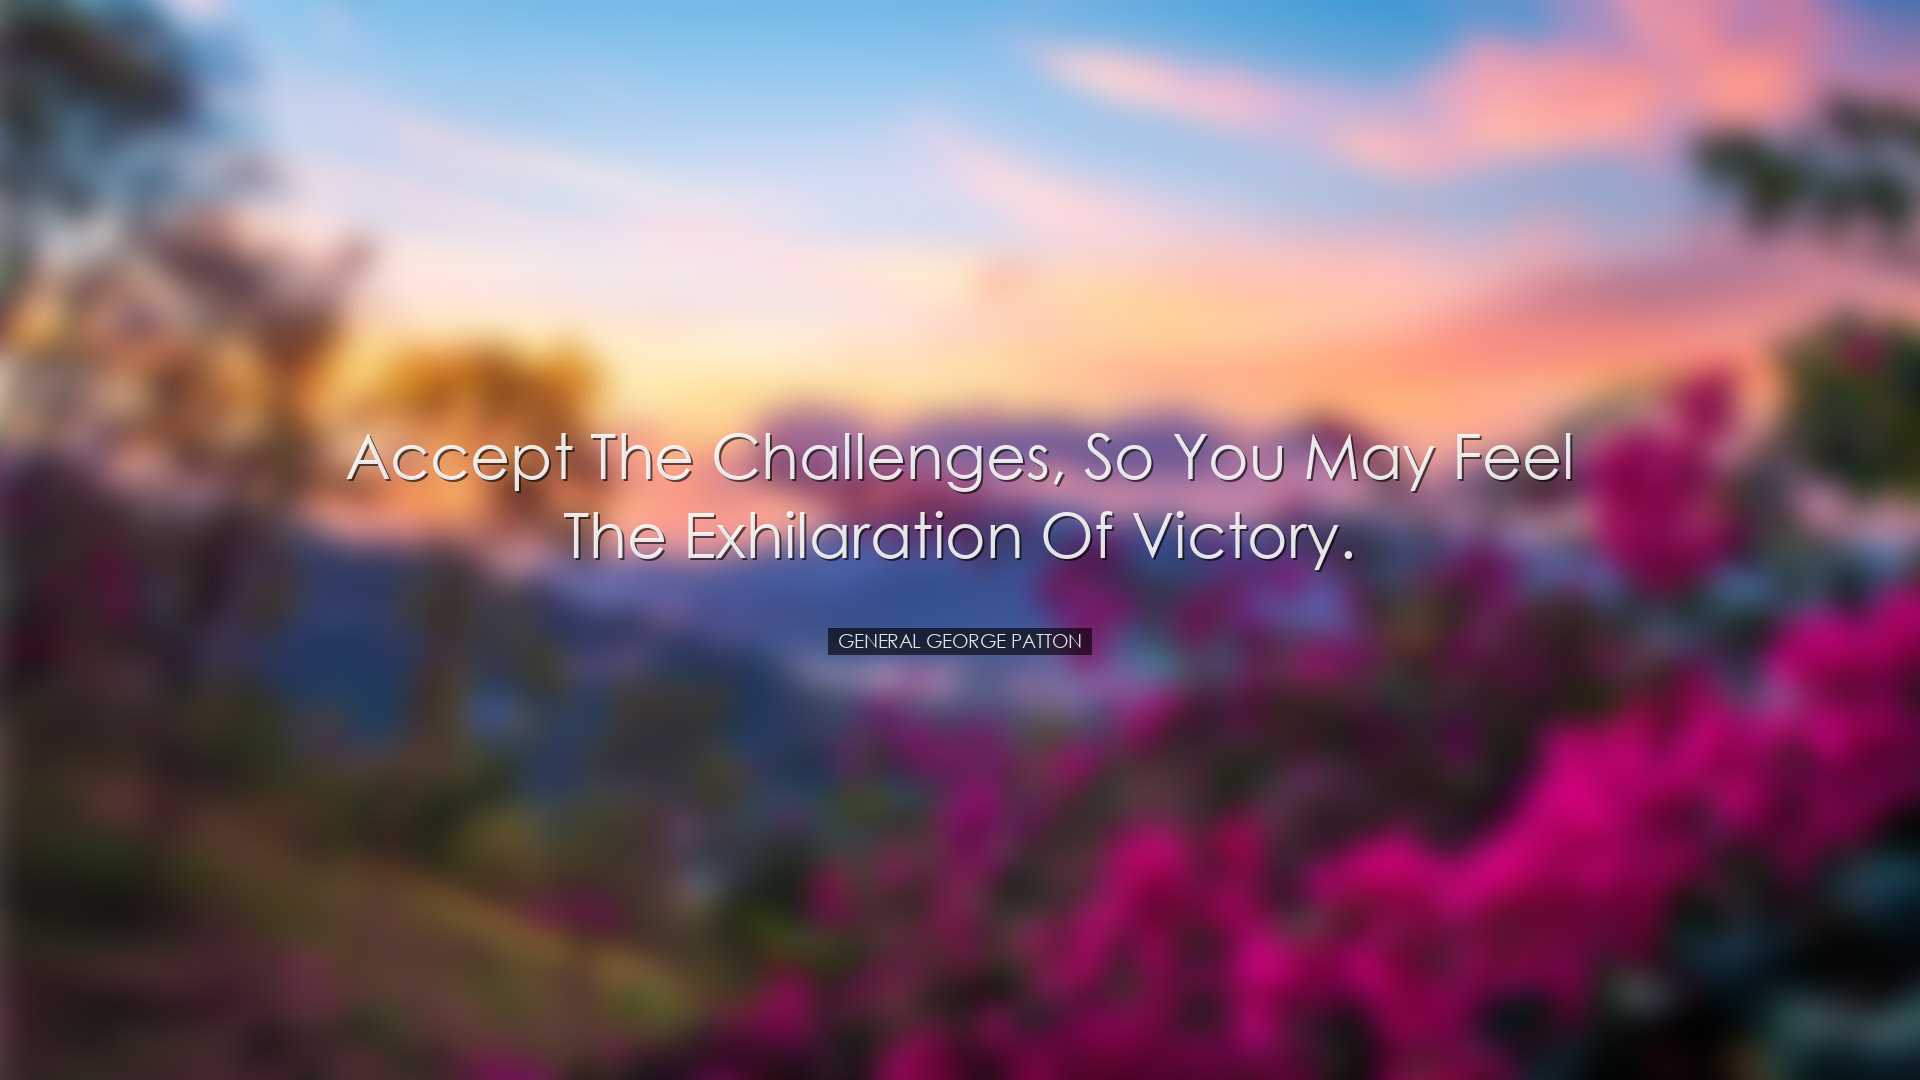 Accept the challenges, so you may feel the exhilaration of victory